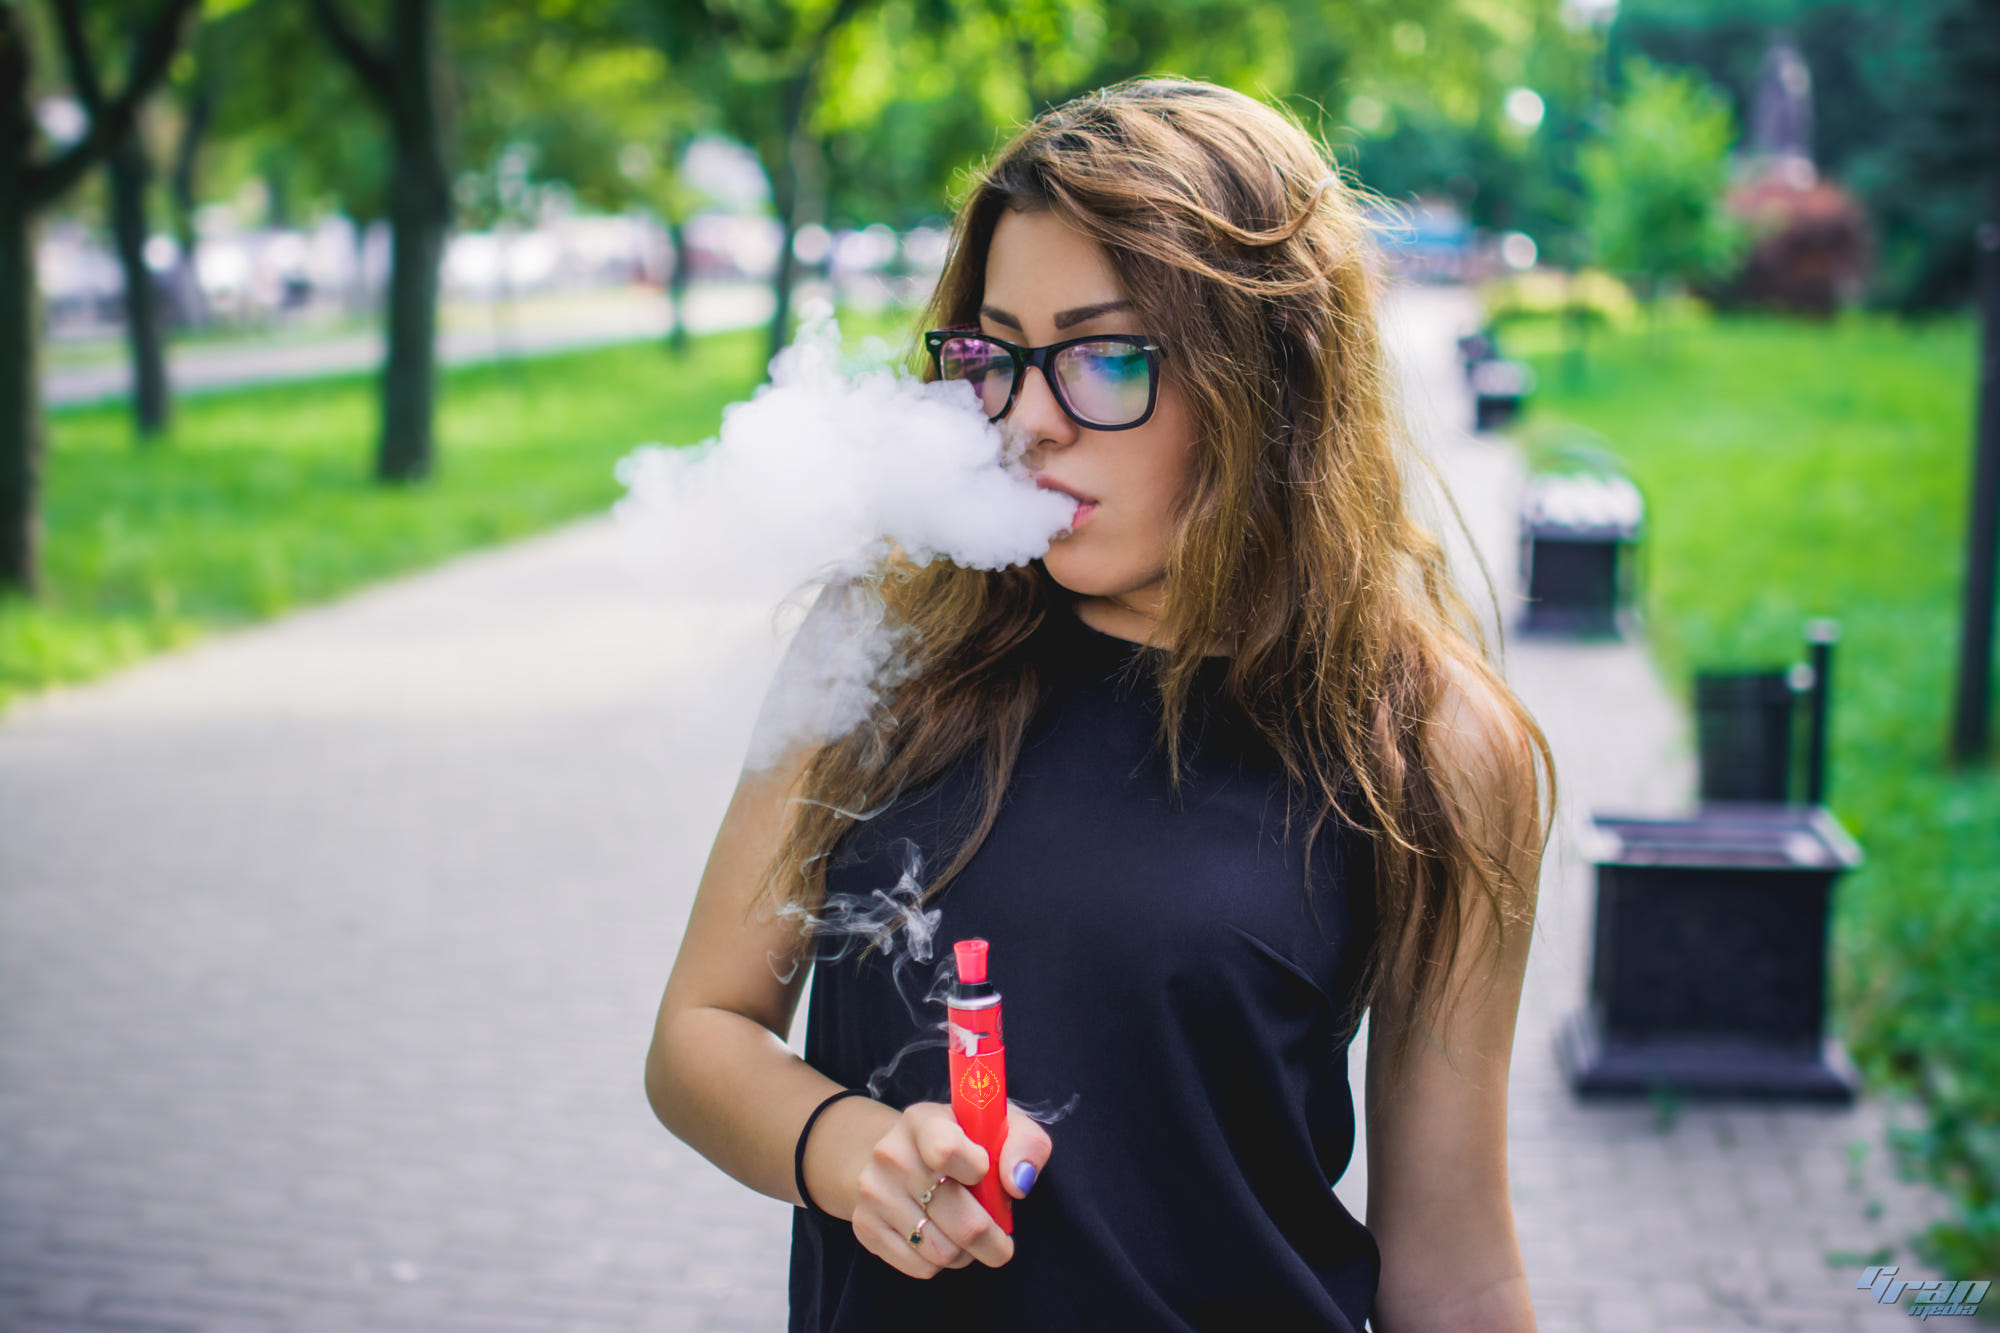 Best Vaping Girls at Vape HK Today - 2019 March Latest Hot Pictures.